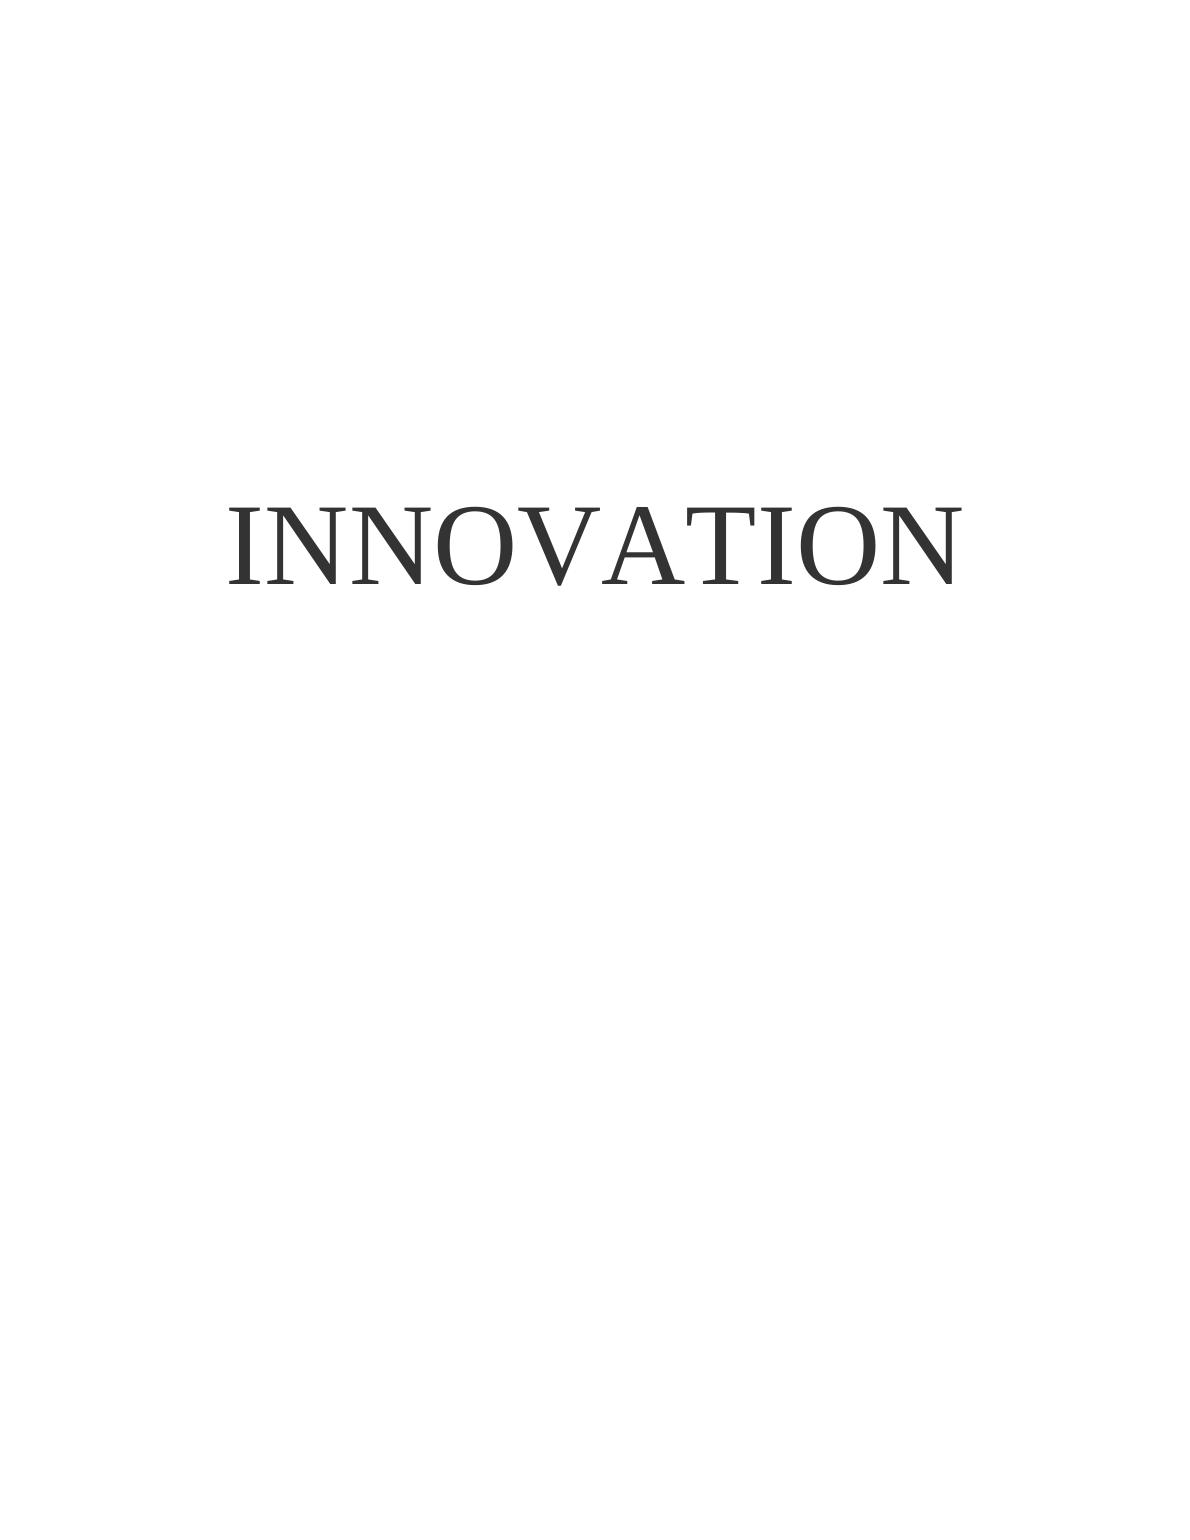 (PDF) The definition and classification of innovation_1